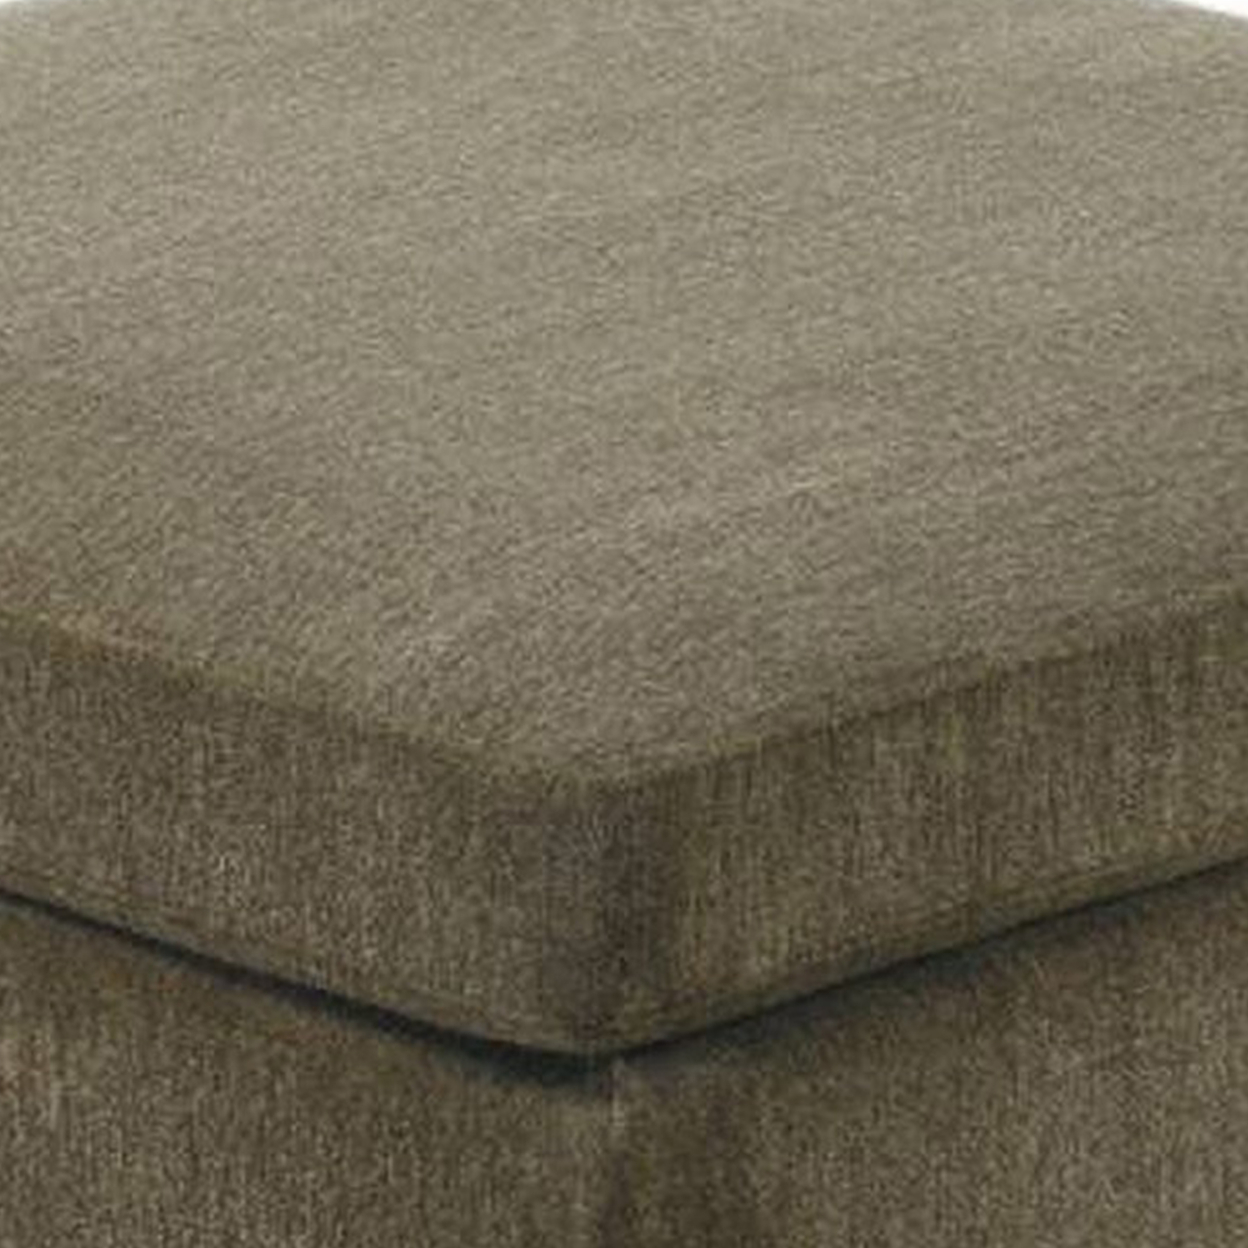 37 Inches Fabric Upholstered Wooden Ottoman, Taupe Brown- Saltoro Sherpi